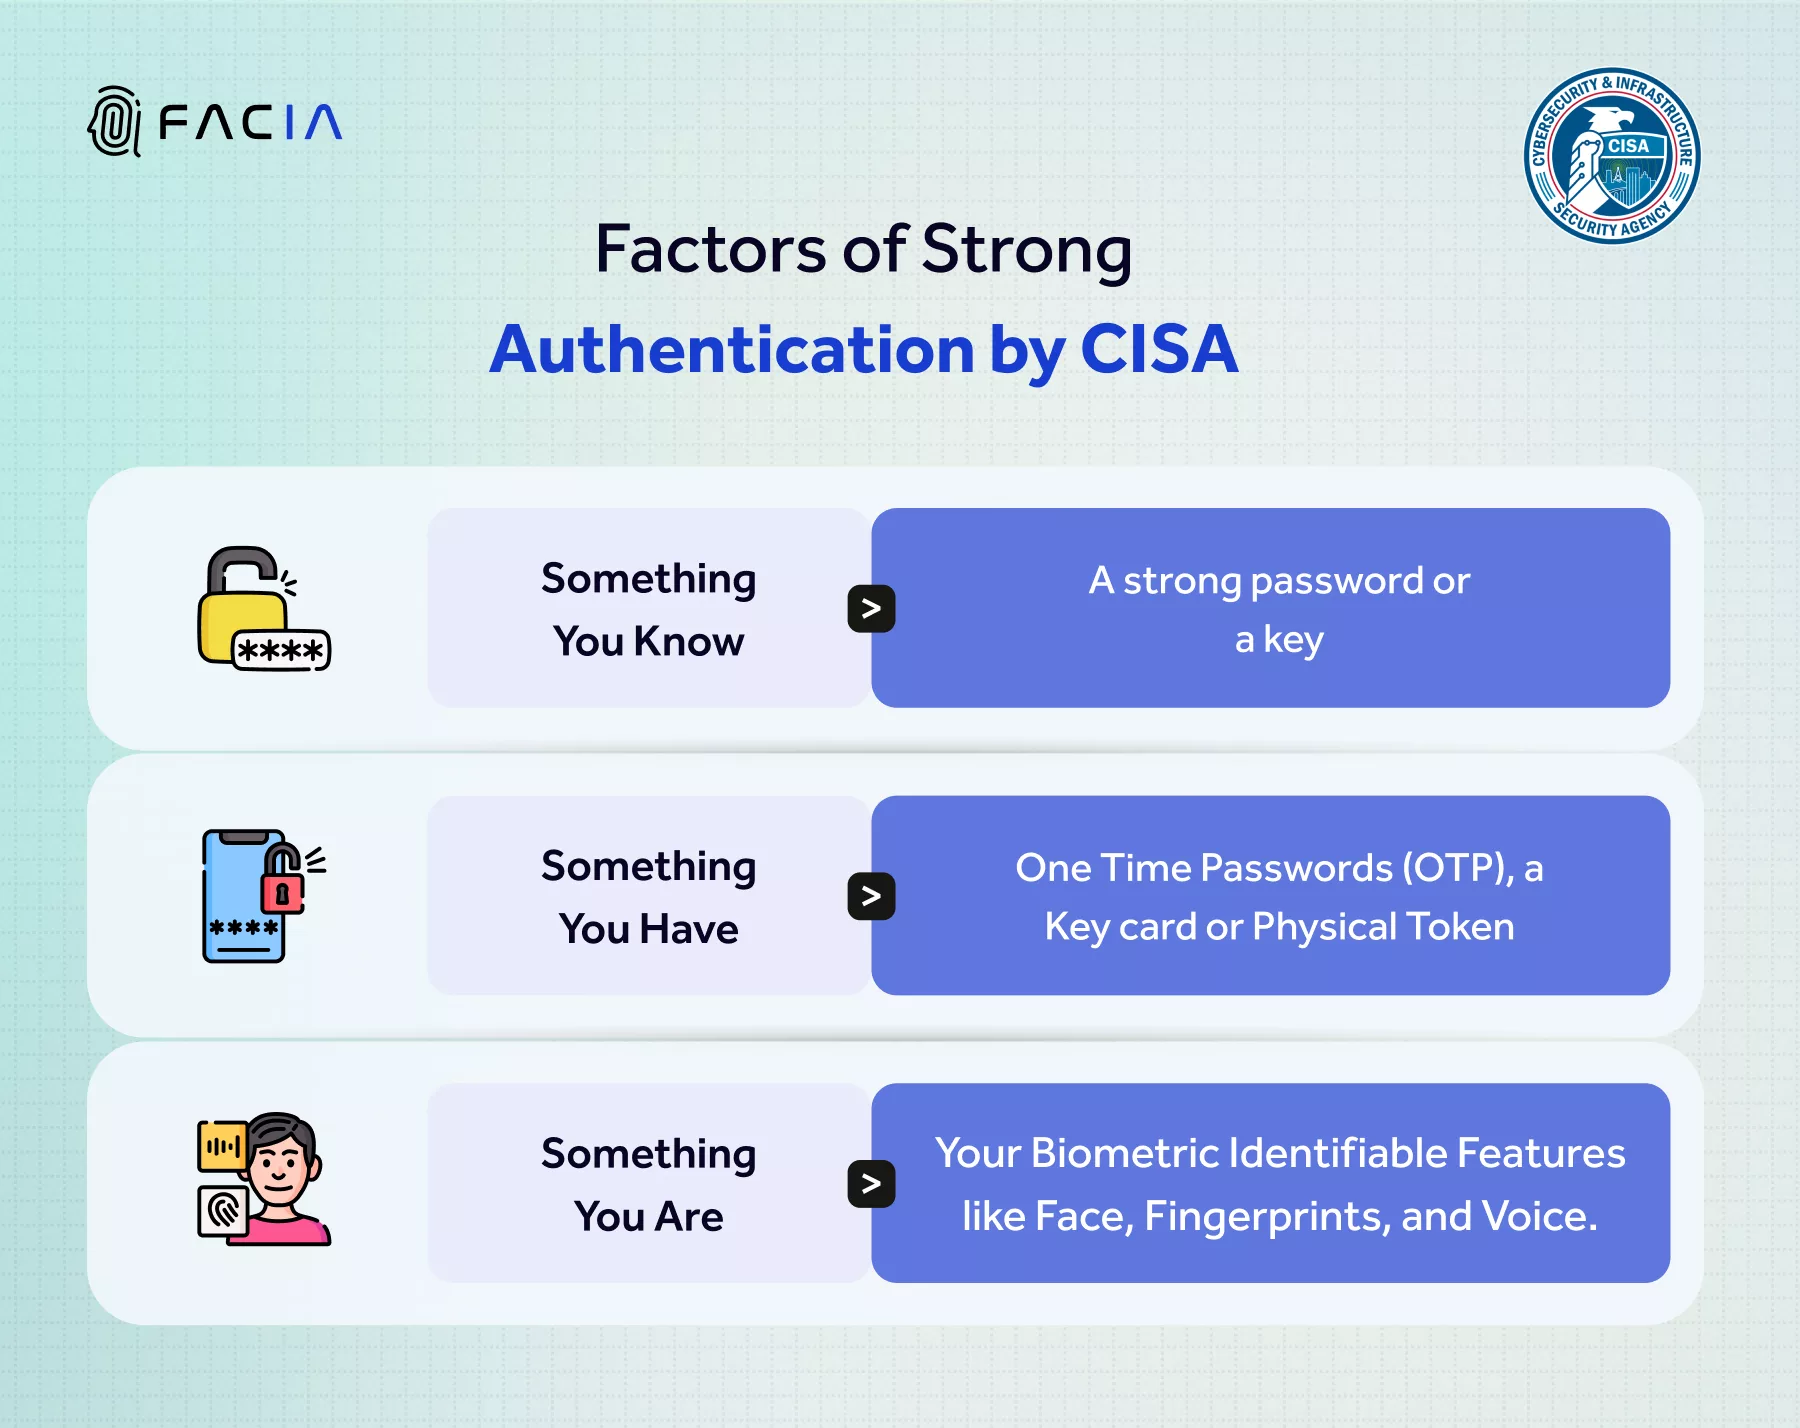 The chart shows three important factors of a Strong Authentication proposed by CISA (Cybersecurity Infrastructure & Security Agency)